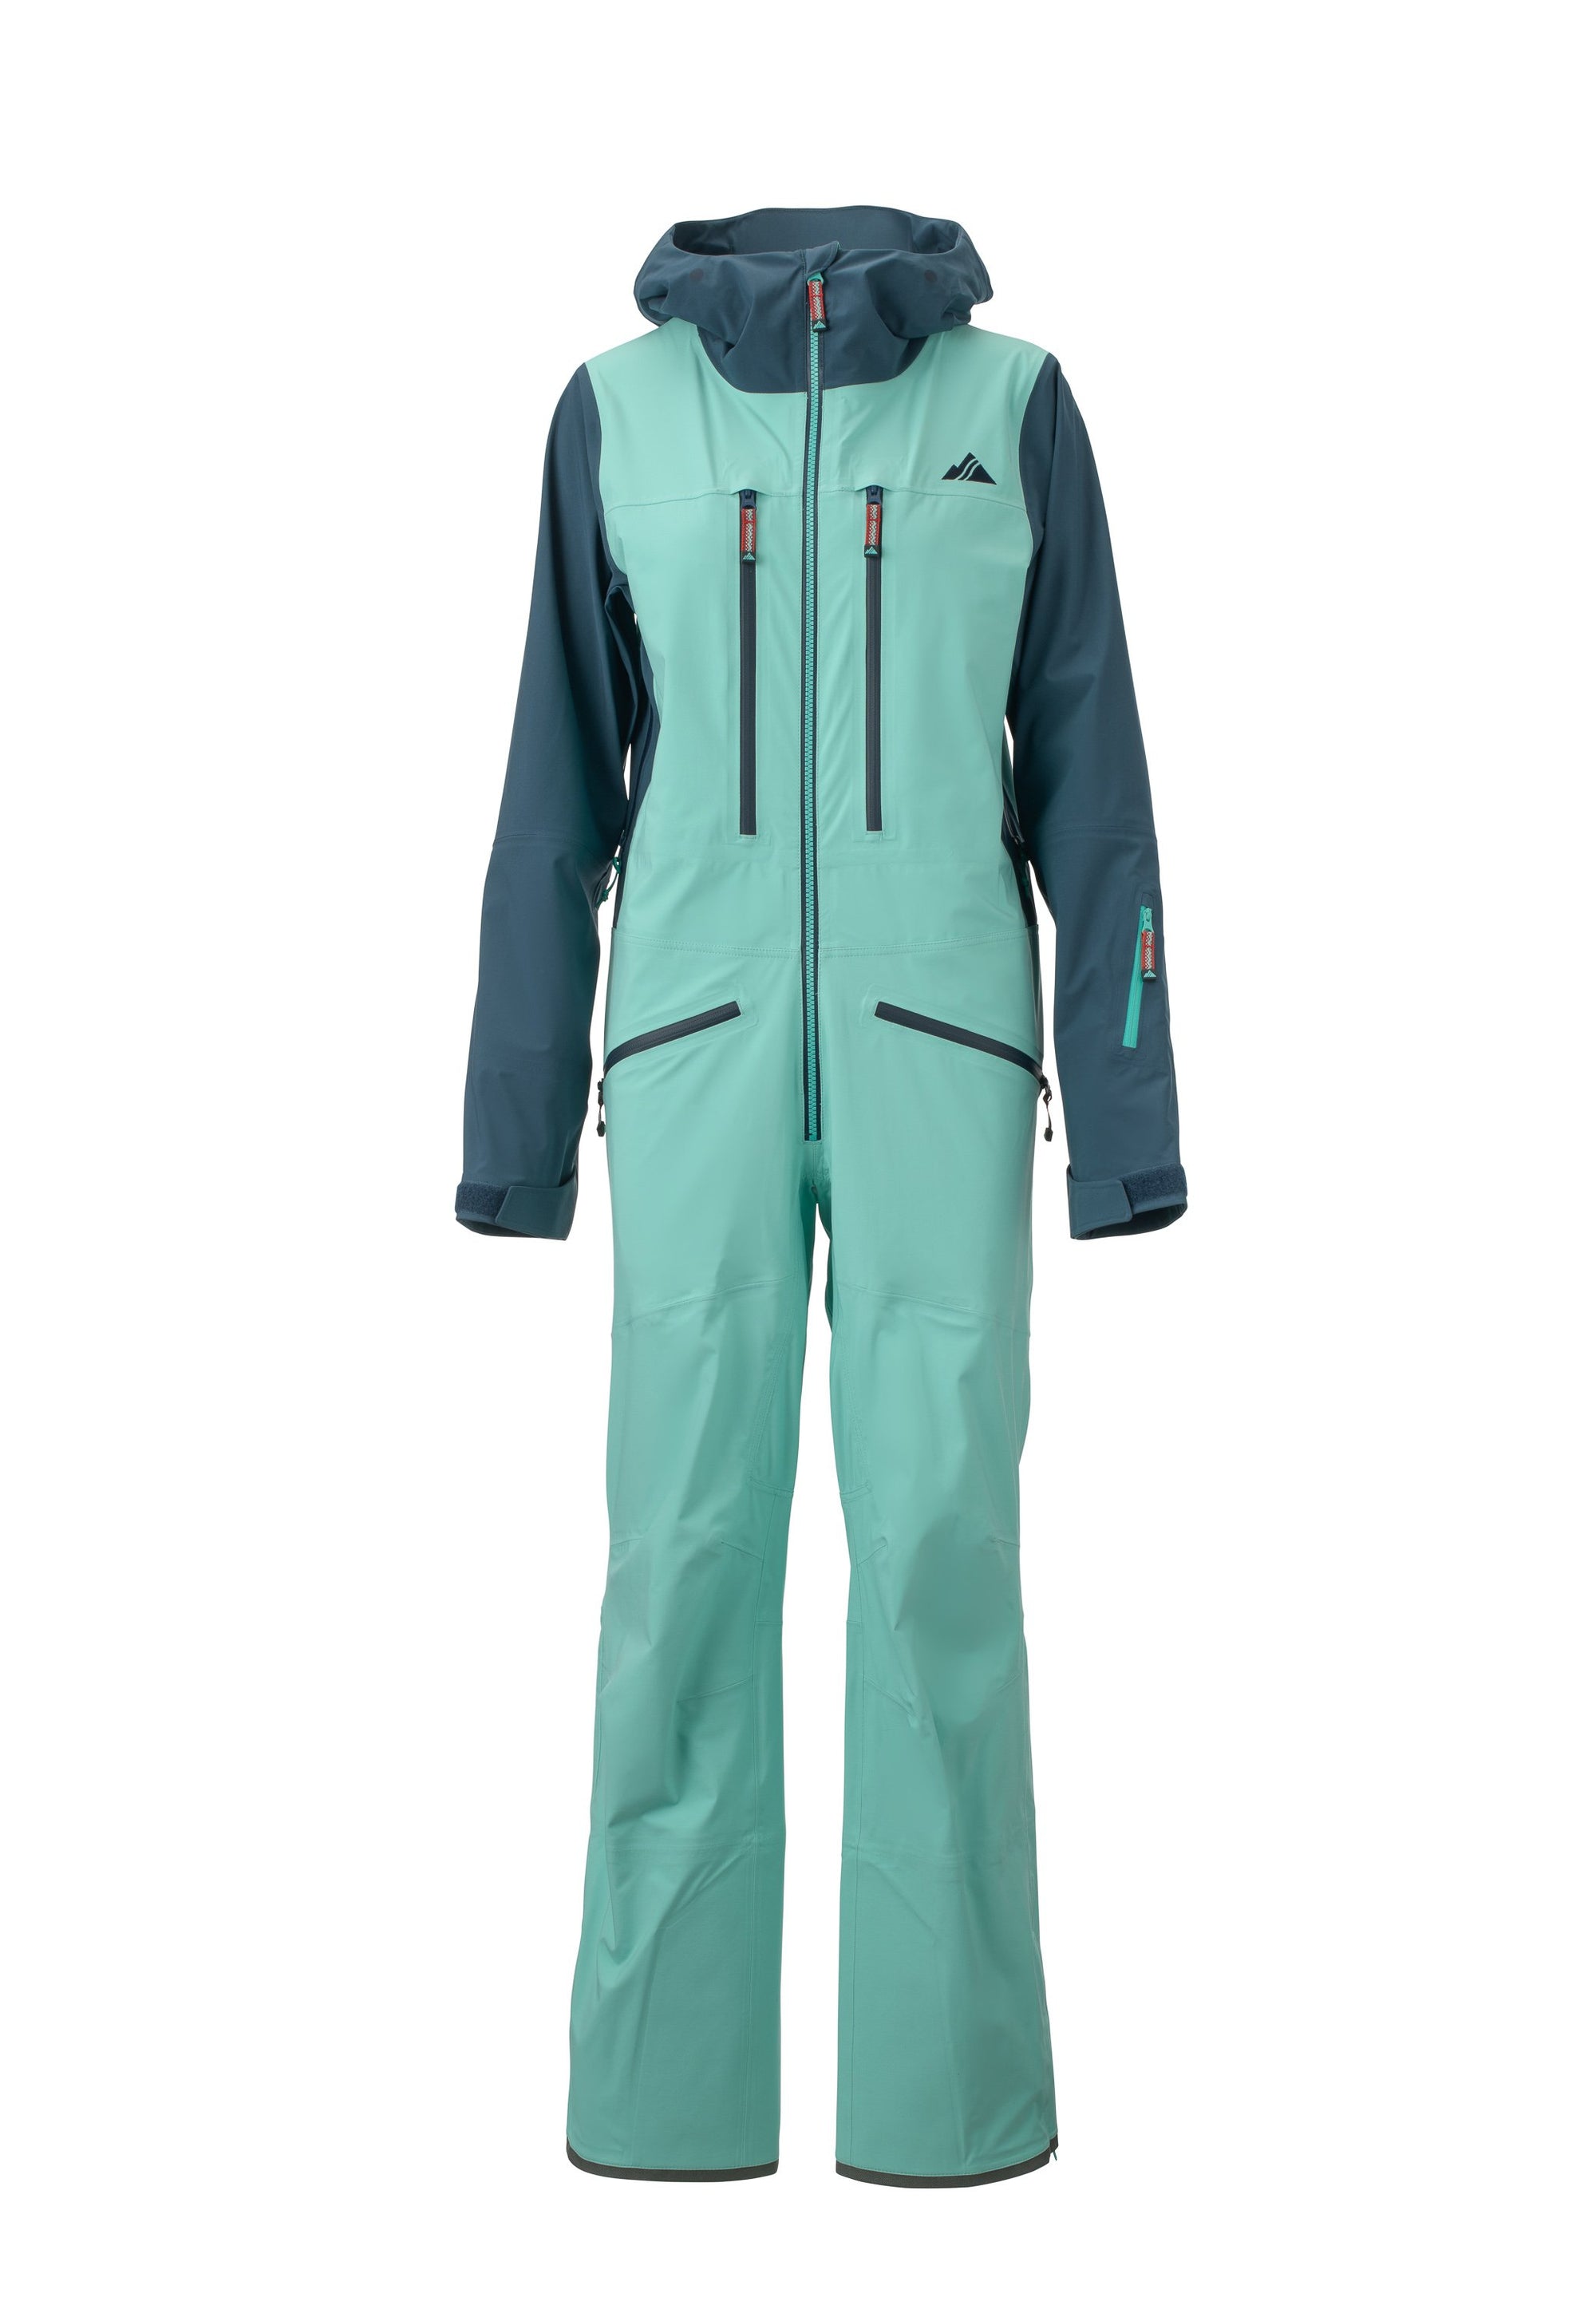 tropicana 2019 women's sickbird event shell skiing and snowboarding one-piece suit from strafe outerwear